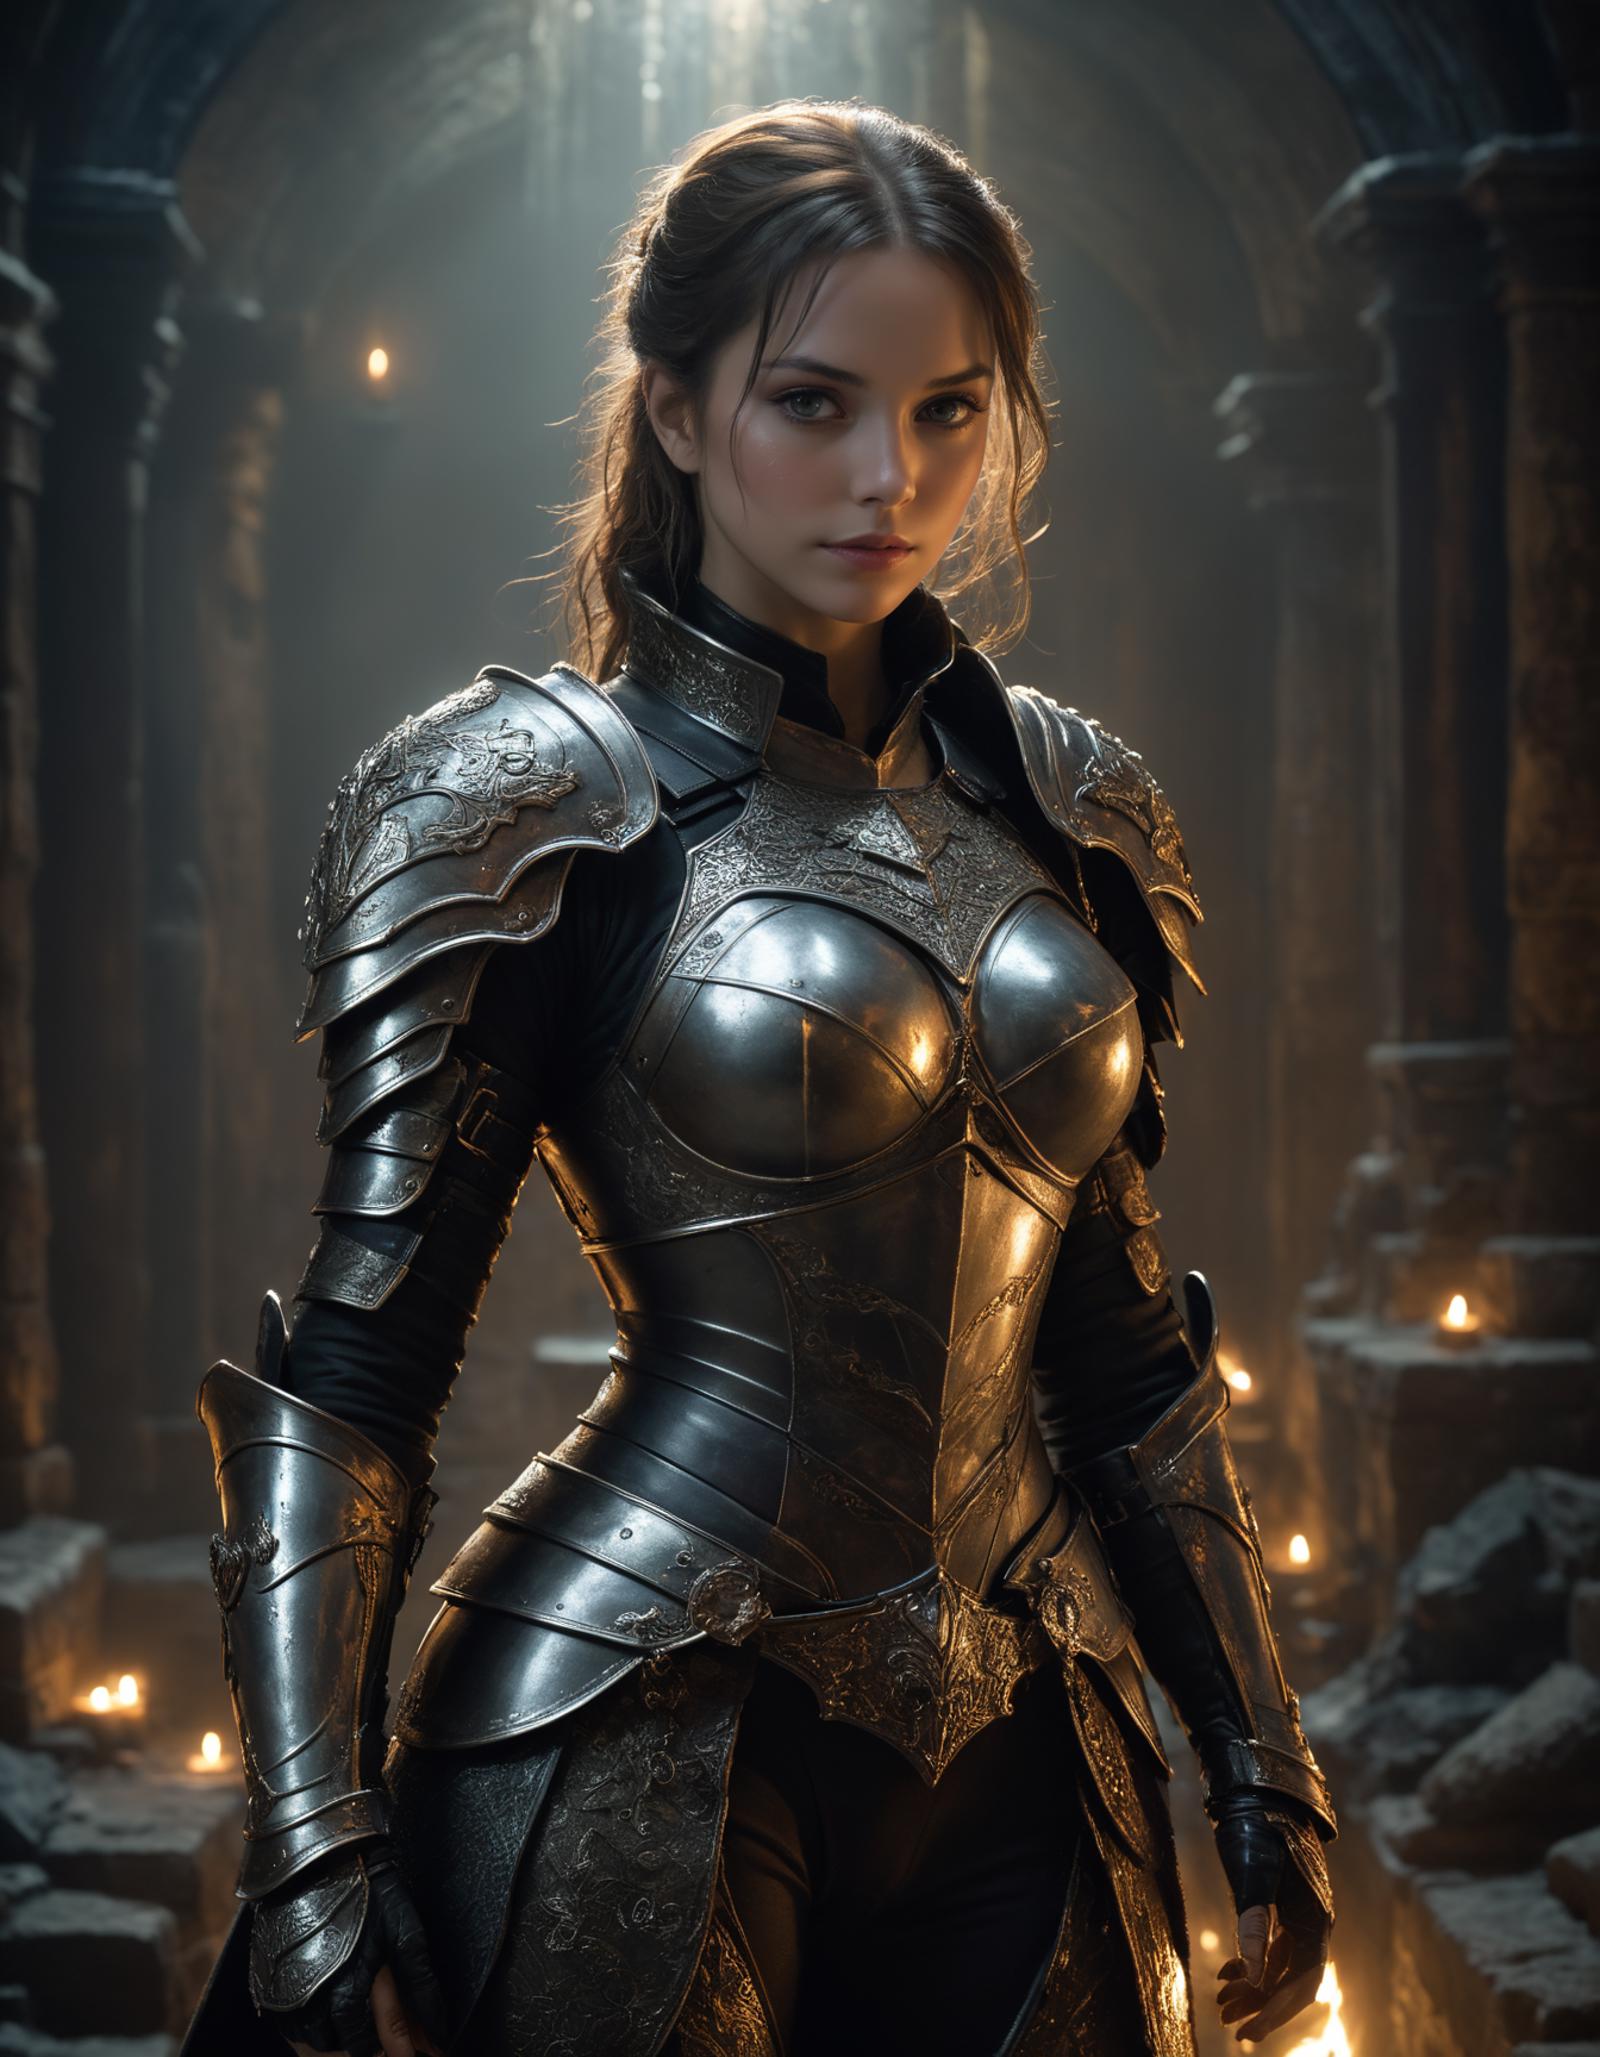 Medieval armor-clad woman in fantasy setting.